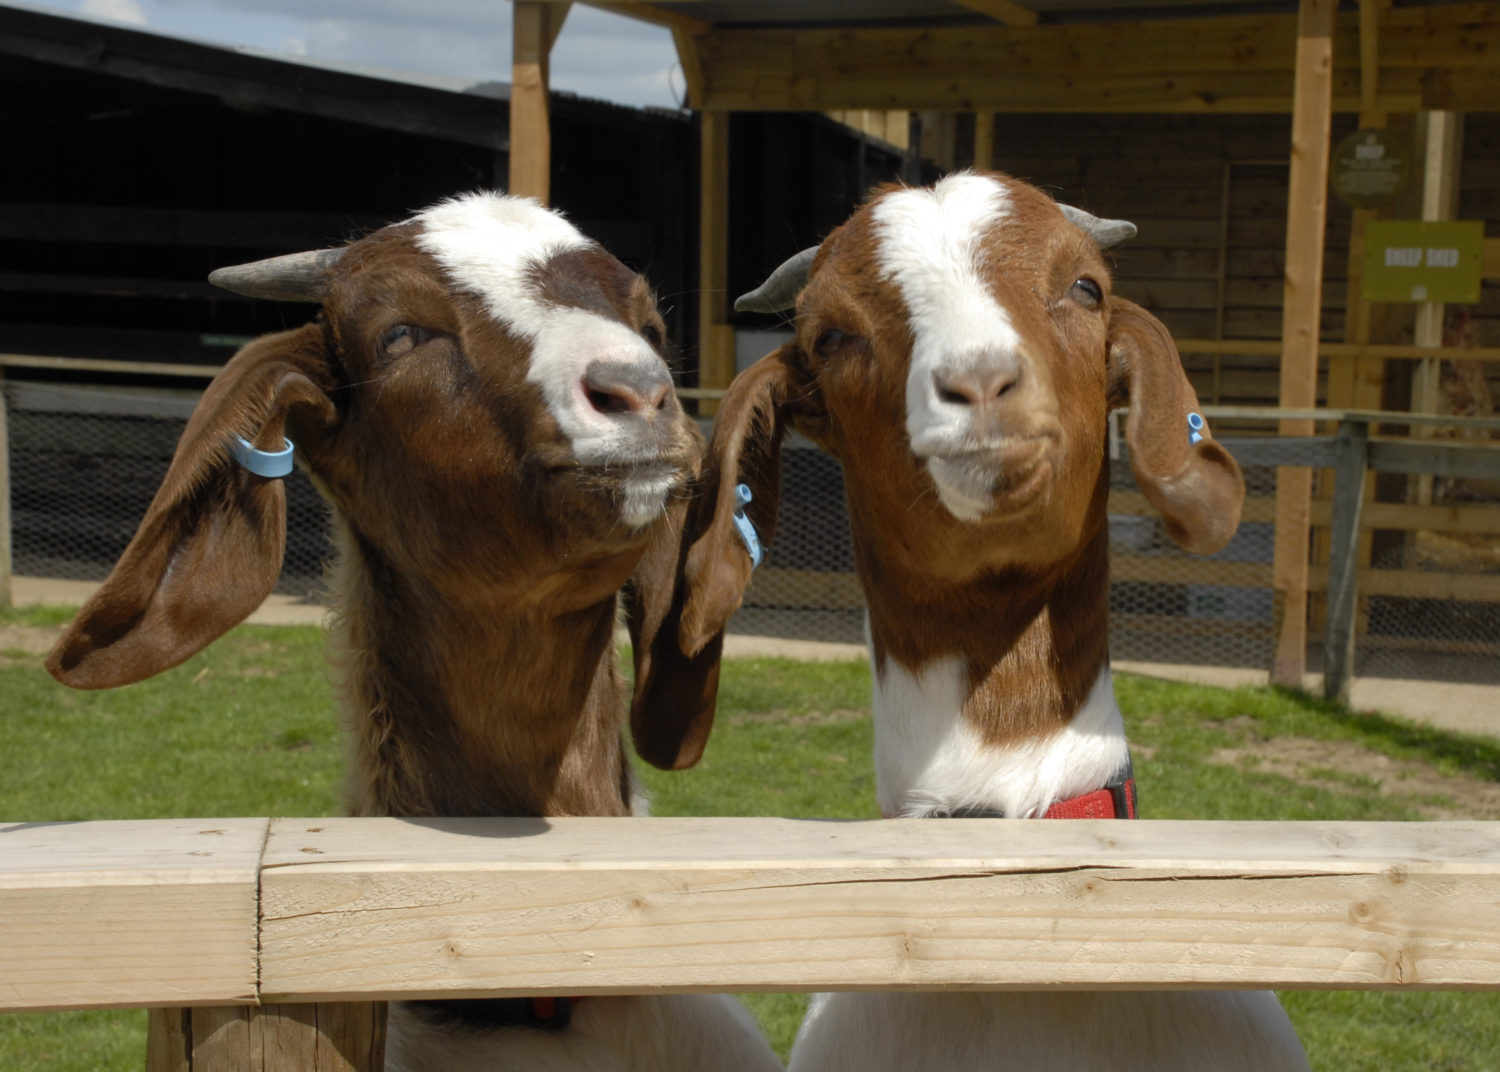 Goats in Kent